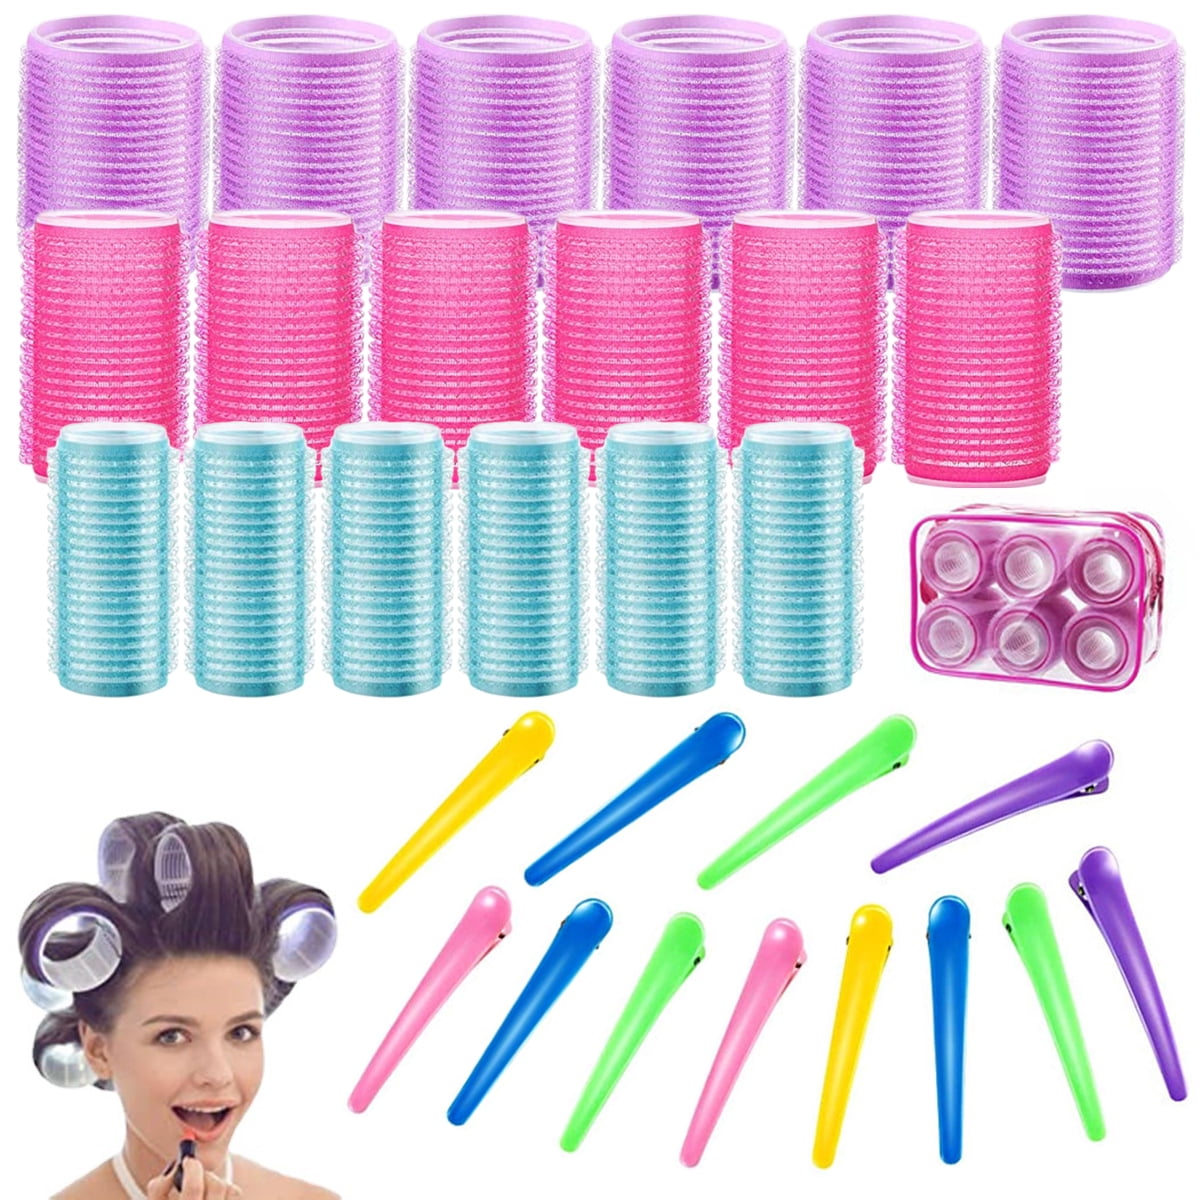 31 Pieces Self-Adhesive Adhesive Rollers Classic Hair Rollers Hair Rollers  Self-Grip Hair Roller Set Hairstyles Adhesive Rollers with Hair Clip for  Women, Men and Children 